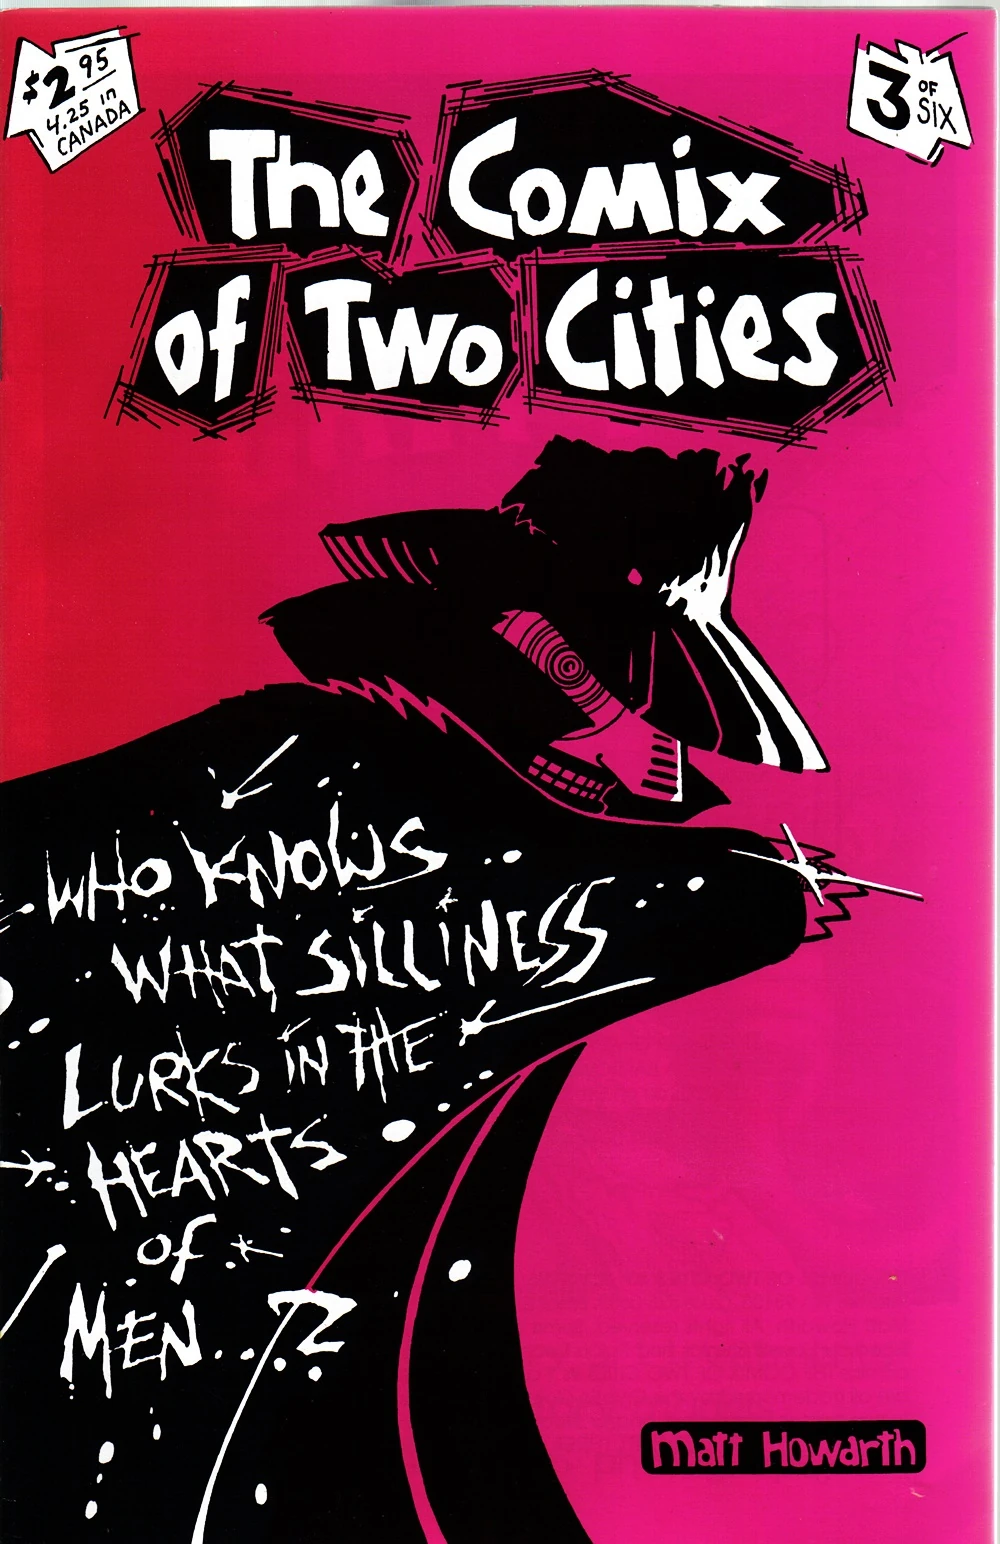 The cover for the reprint third issue of the Comix of Two Cities. It features one of the characters, Shadomole, with the caption on their coat, Who knows what silliness lurks in the hearts of men?